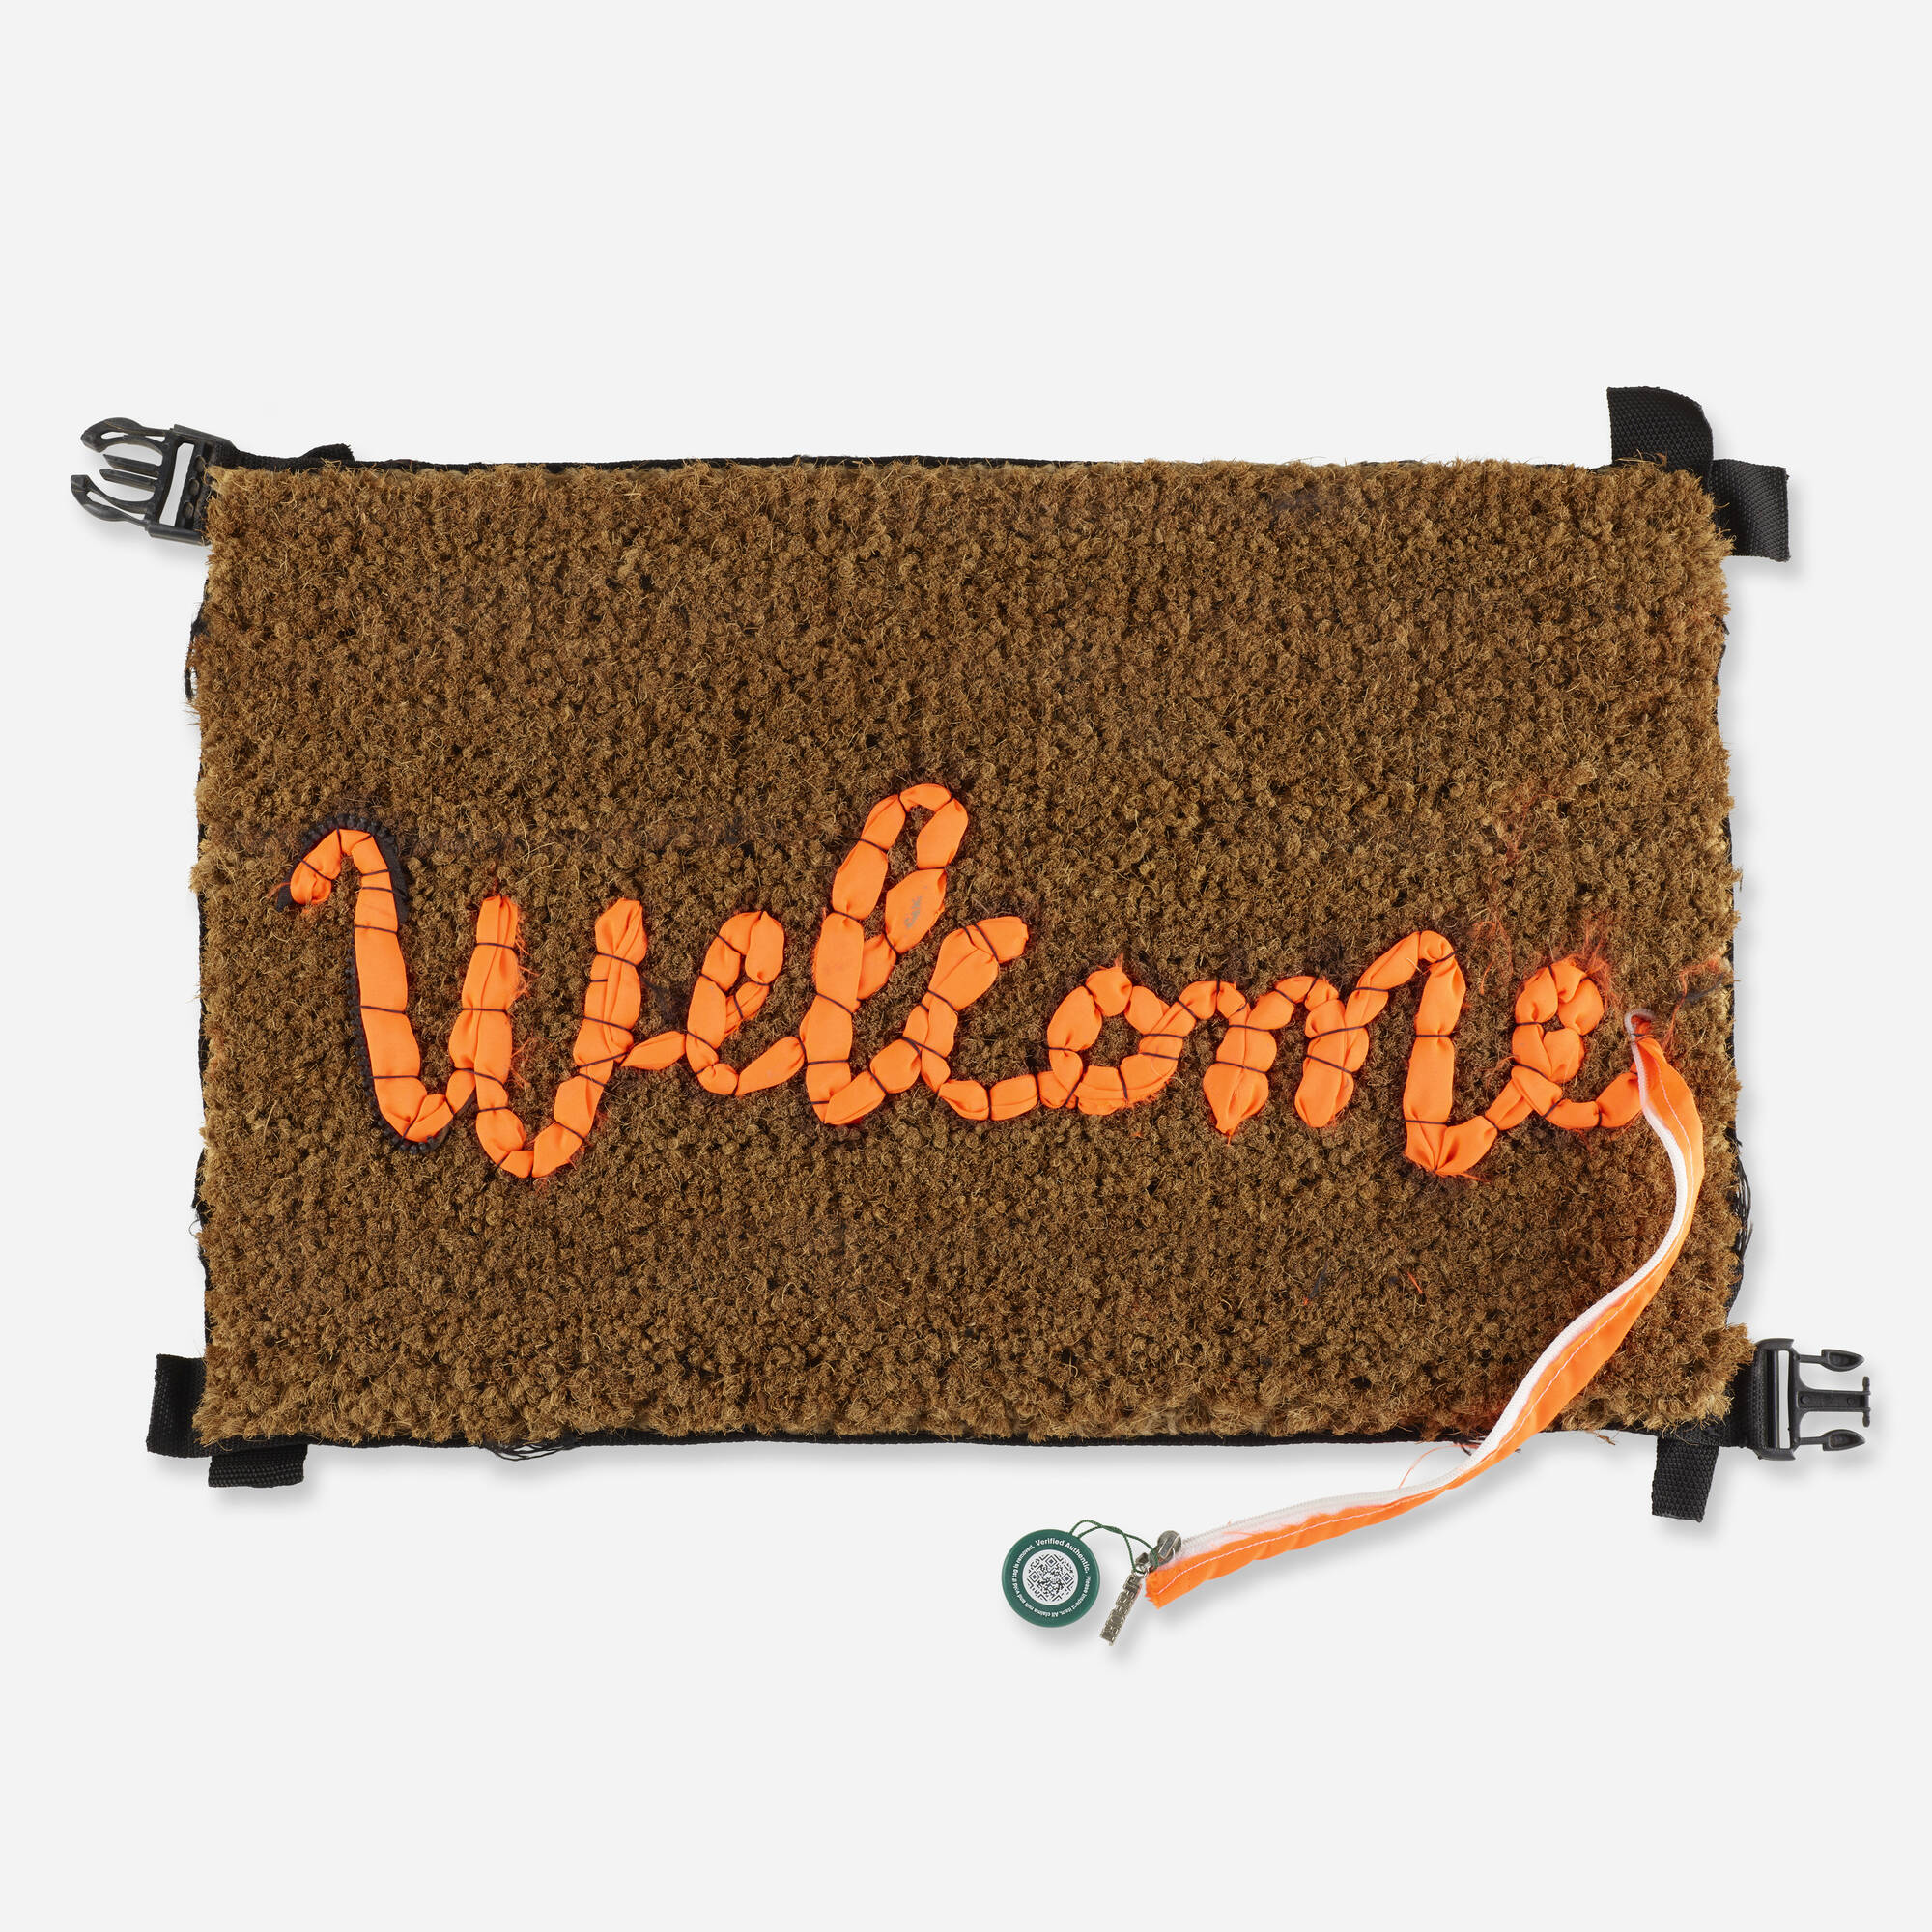 100: BANKSY, Welcome Mat < 20|21 Art: The Chicago Edition, 13 